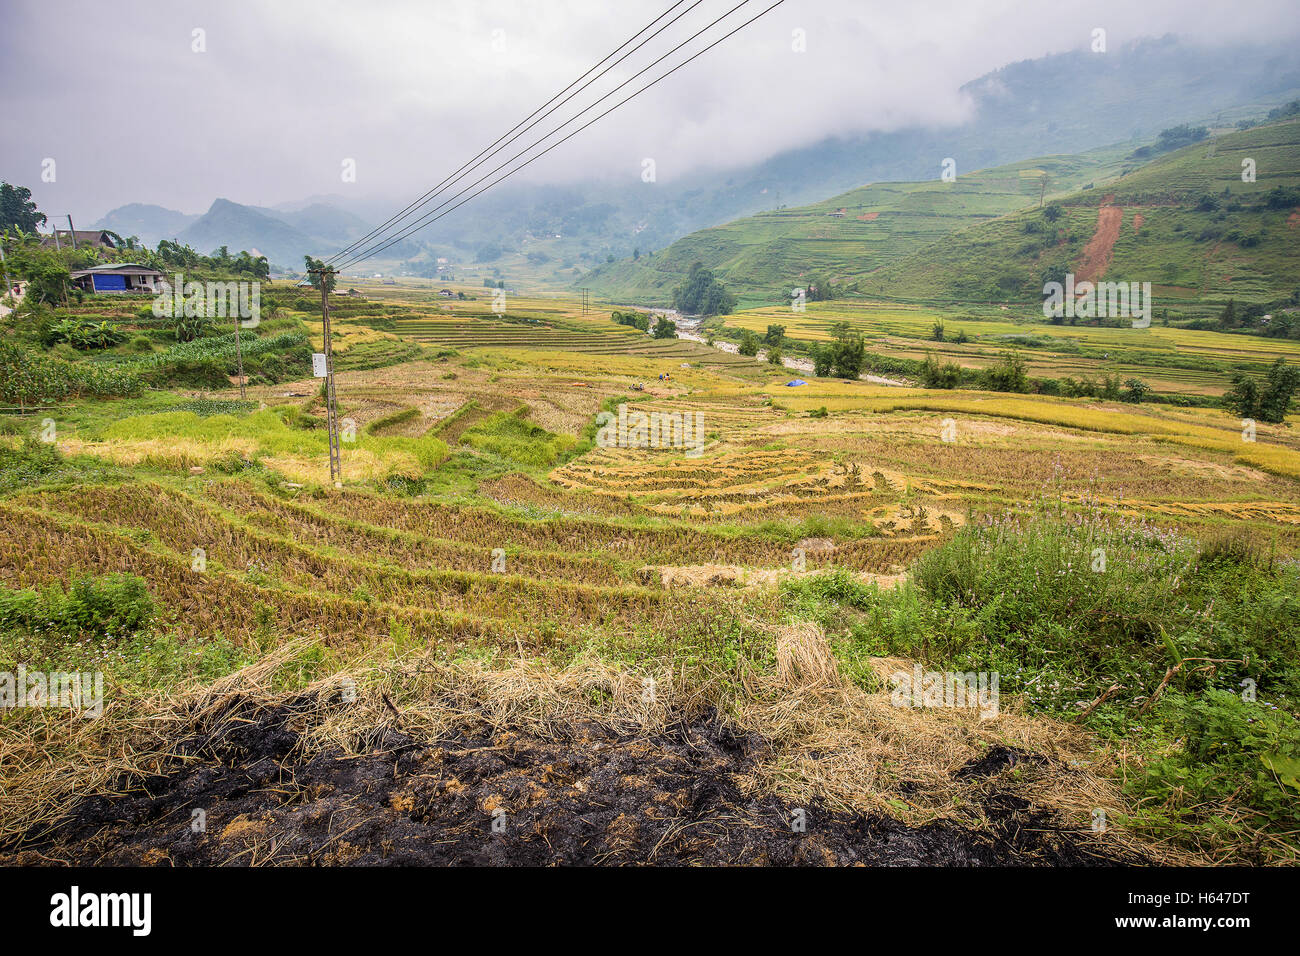 Yellow rice terrace in mountain village in Sa Pa, Vietnam has no rice after harvest season. Stock Photo